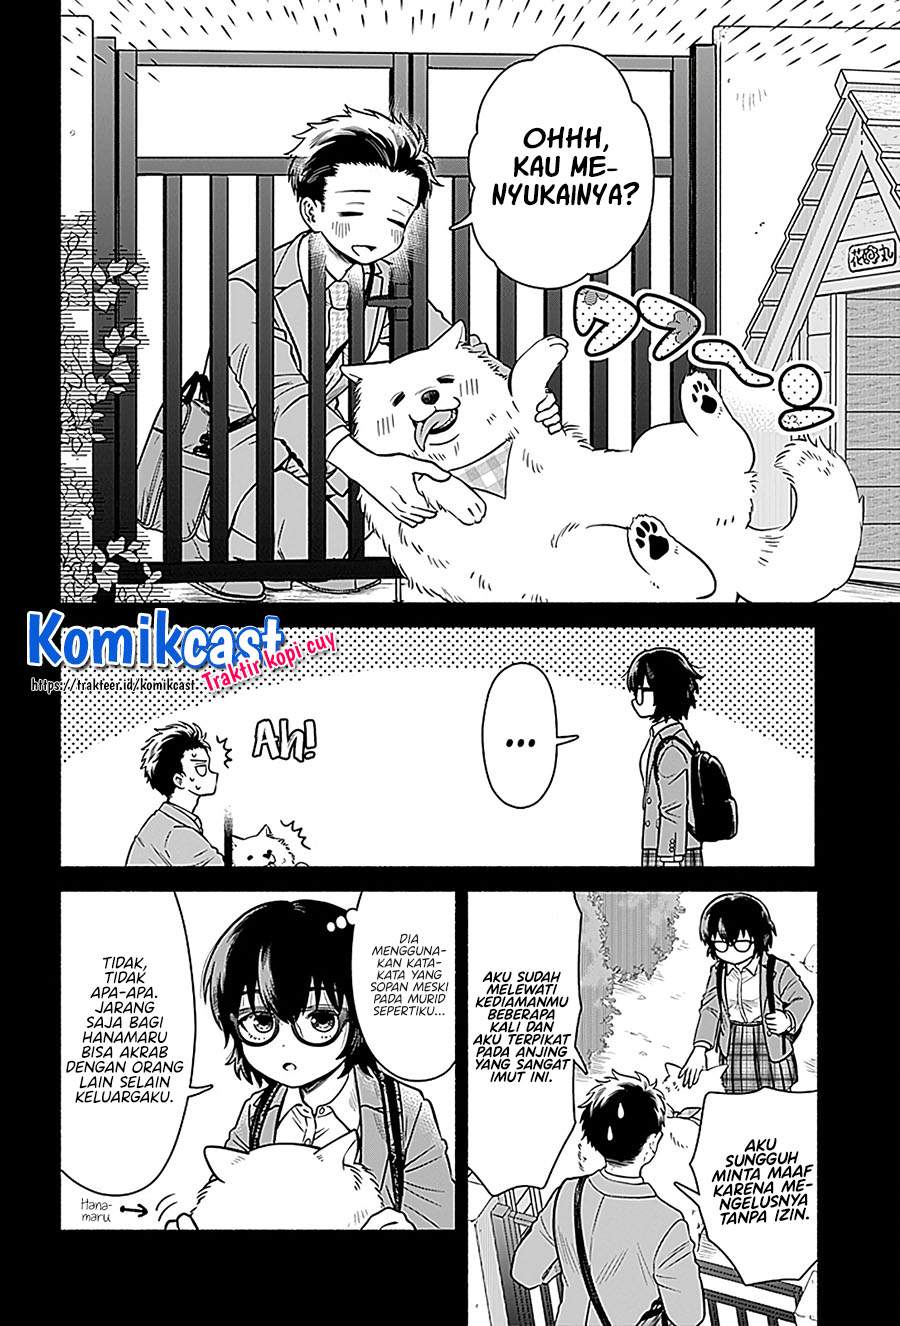 Marriage Gray Chapter 02 Bahasa Indonesia